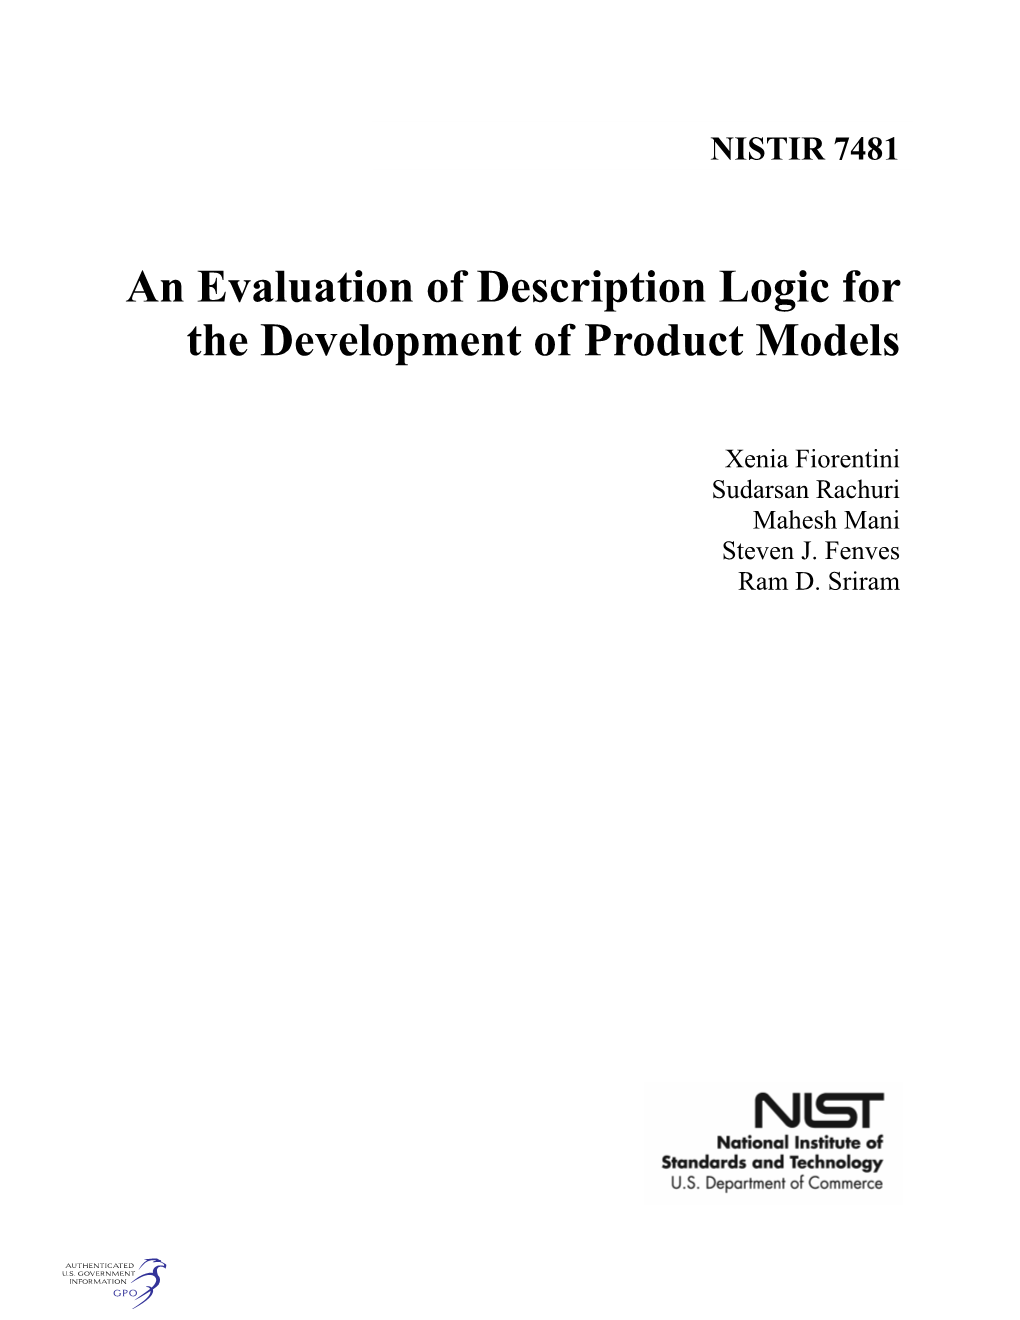 An Evaluation of Description Logic for the Development of Product Models